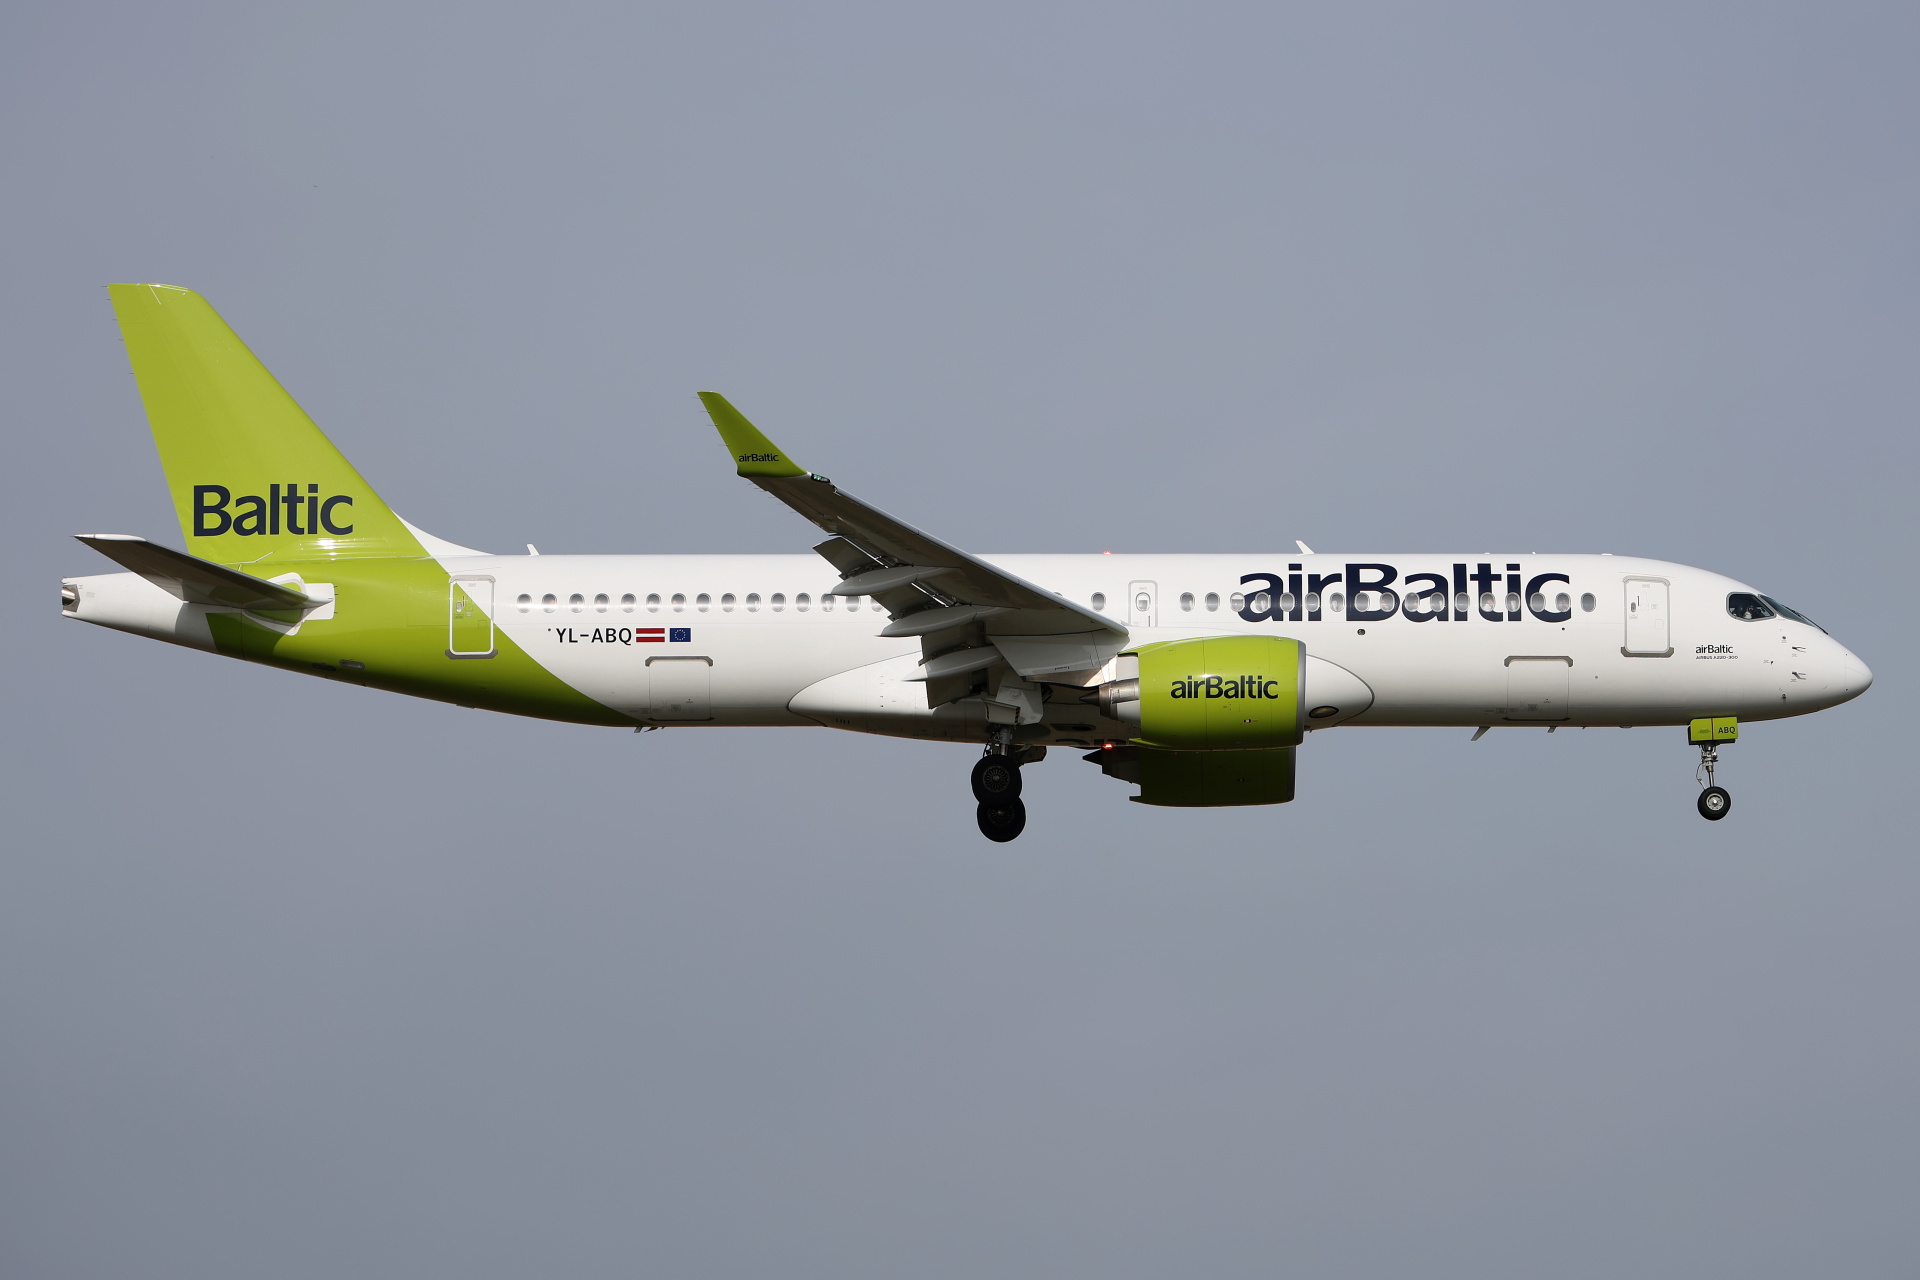 YL-ABQ (Aircraft » EPWA Spotting » Airbus A220-300 » airBaltic)